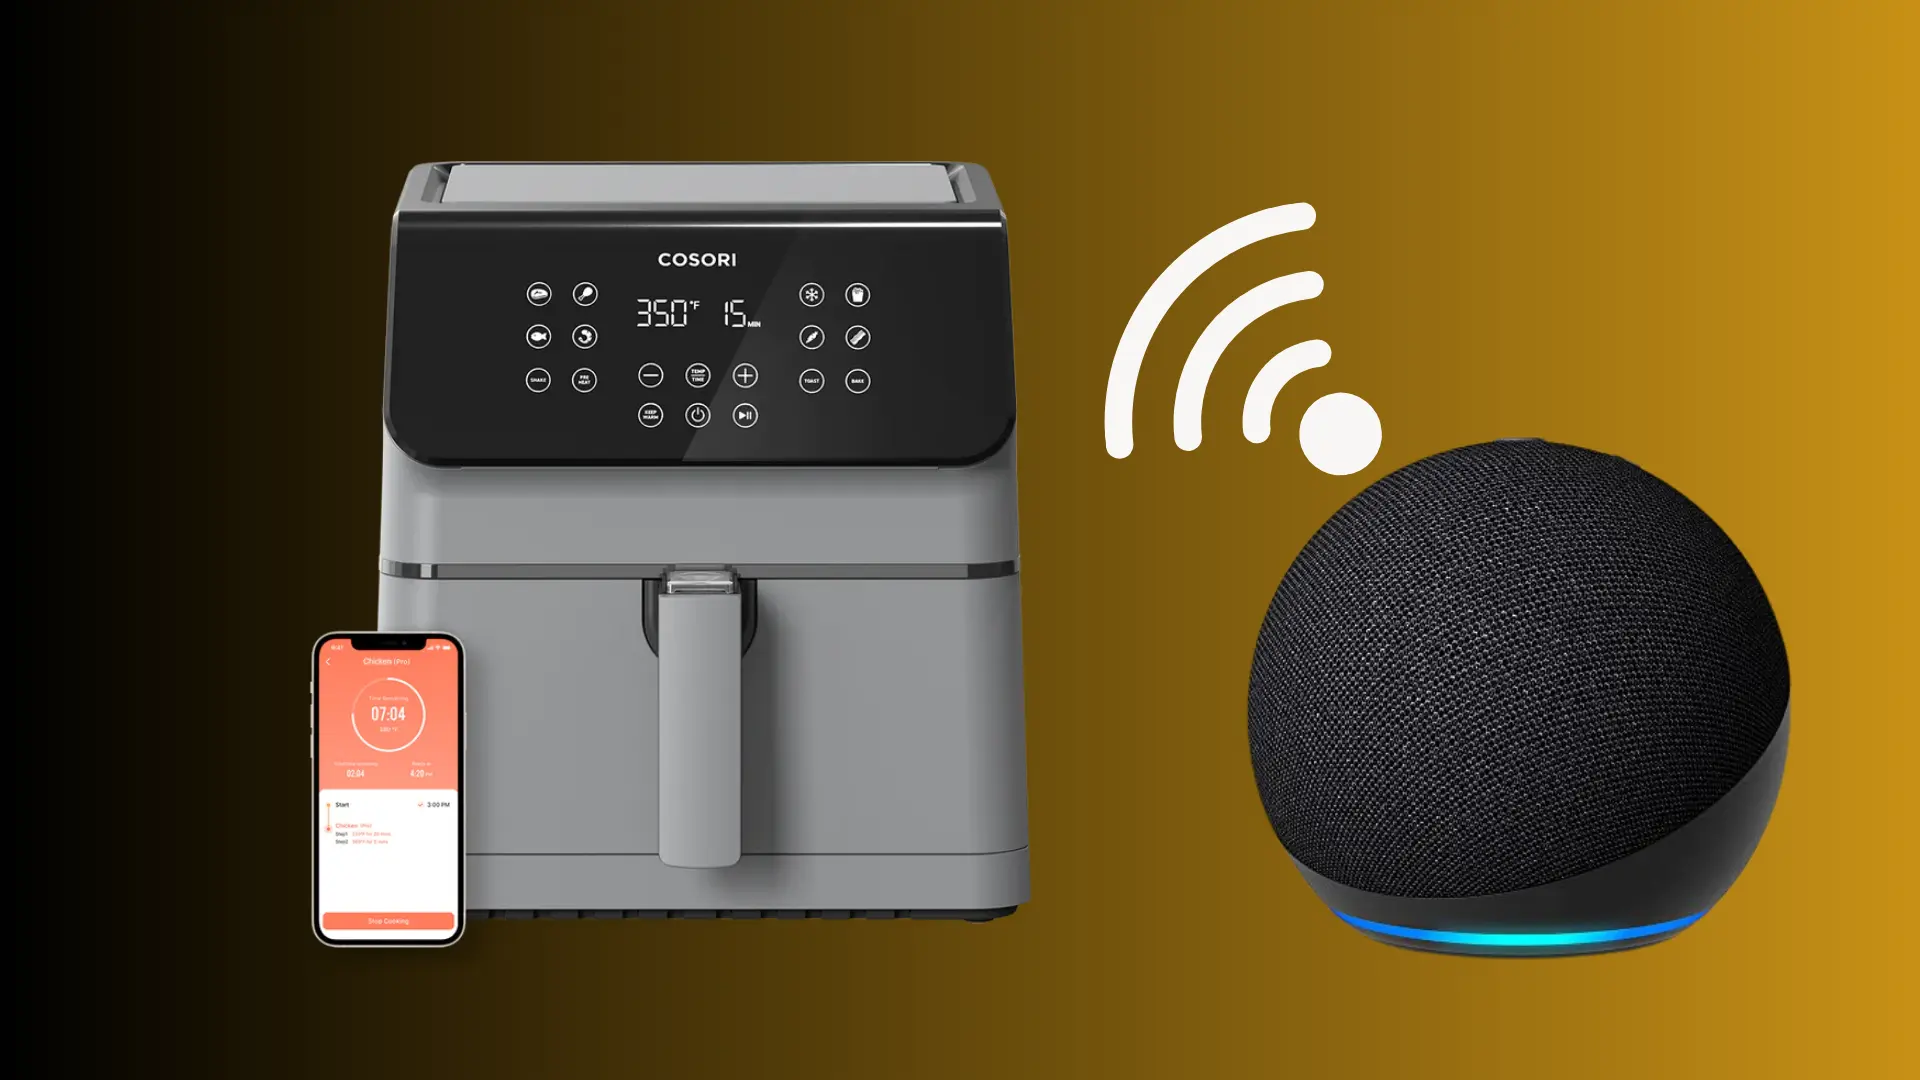 How to connect cosori air fryer to Alexa